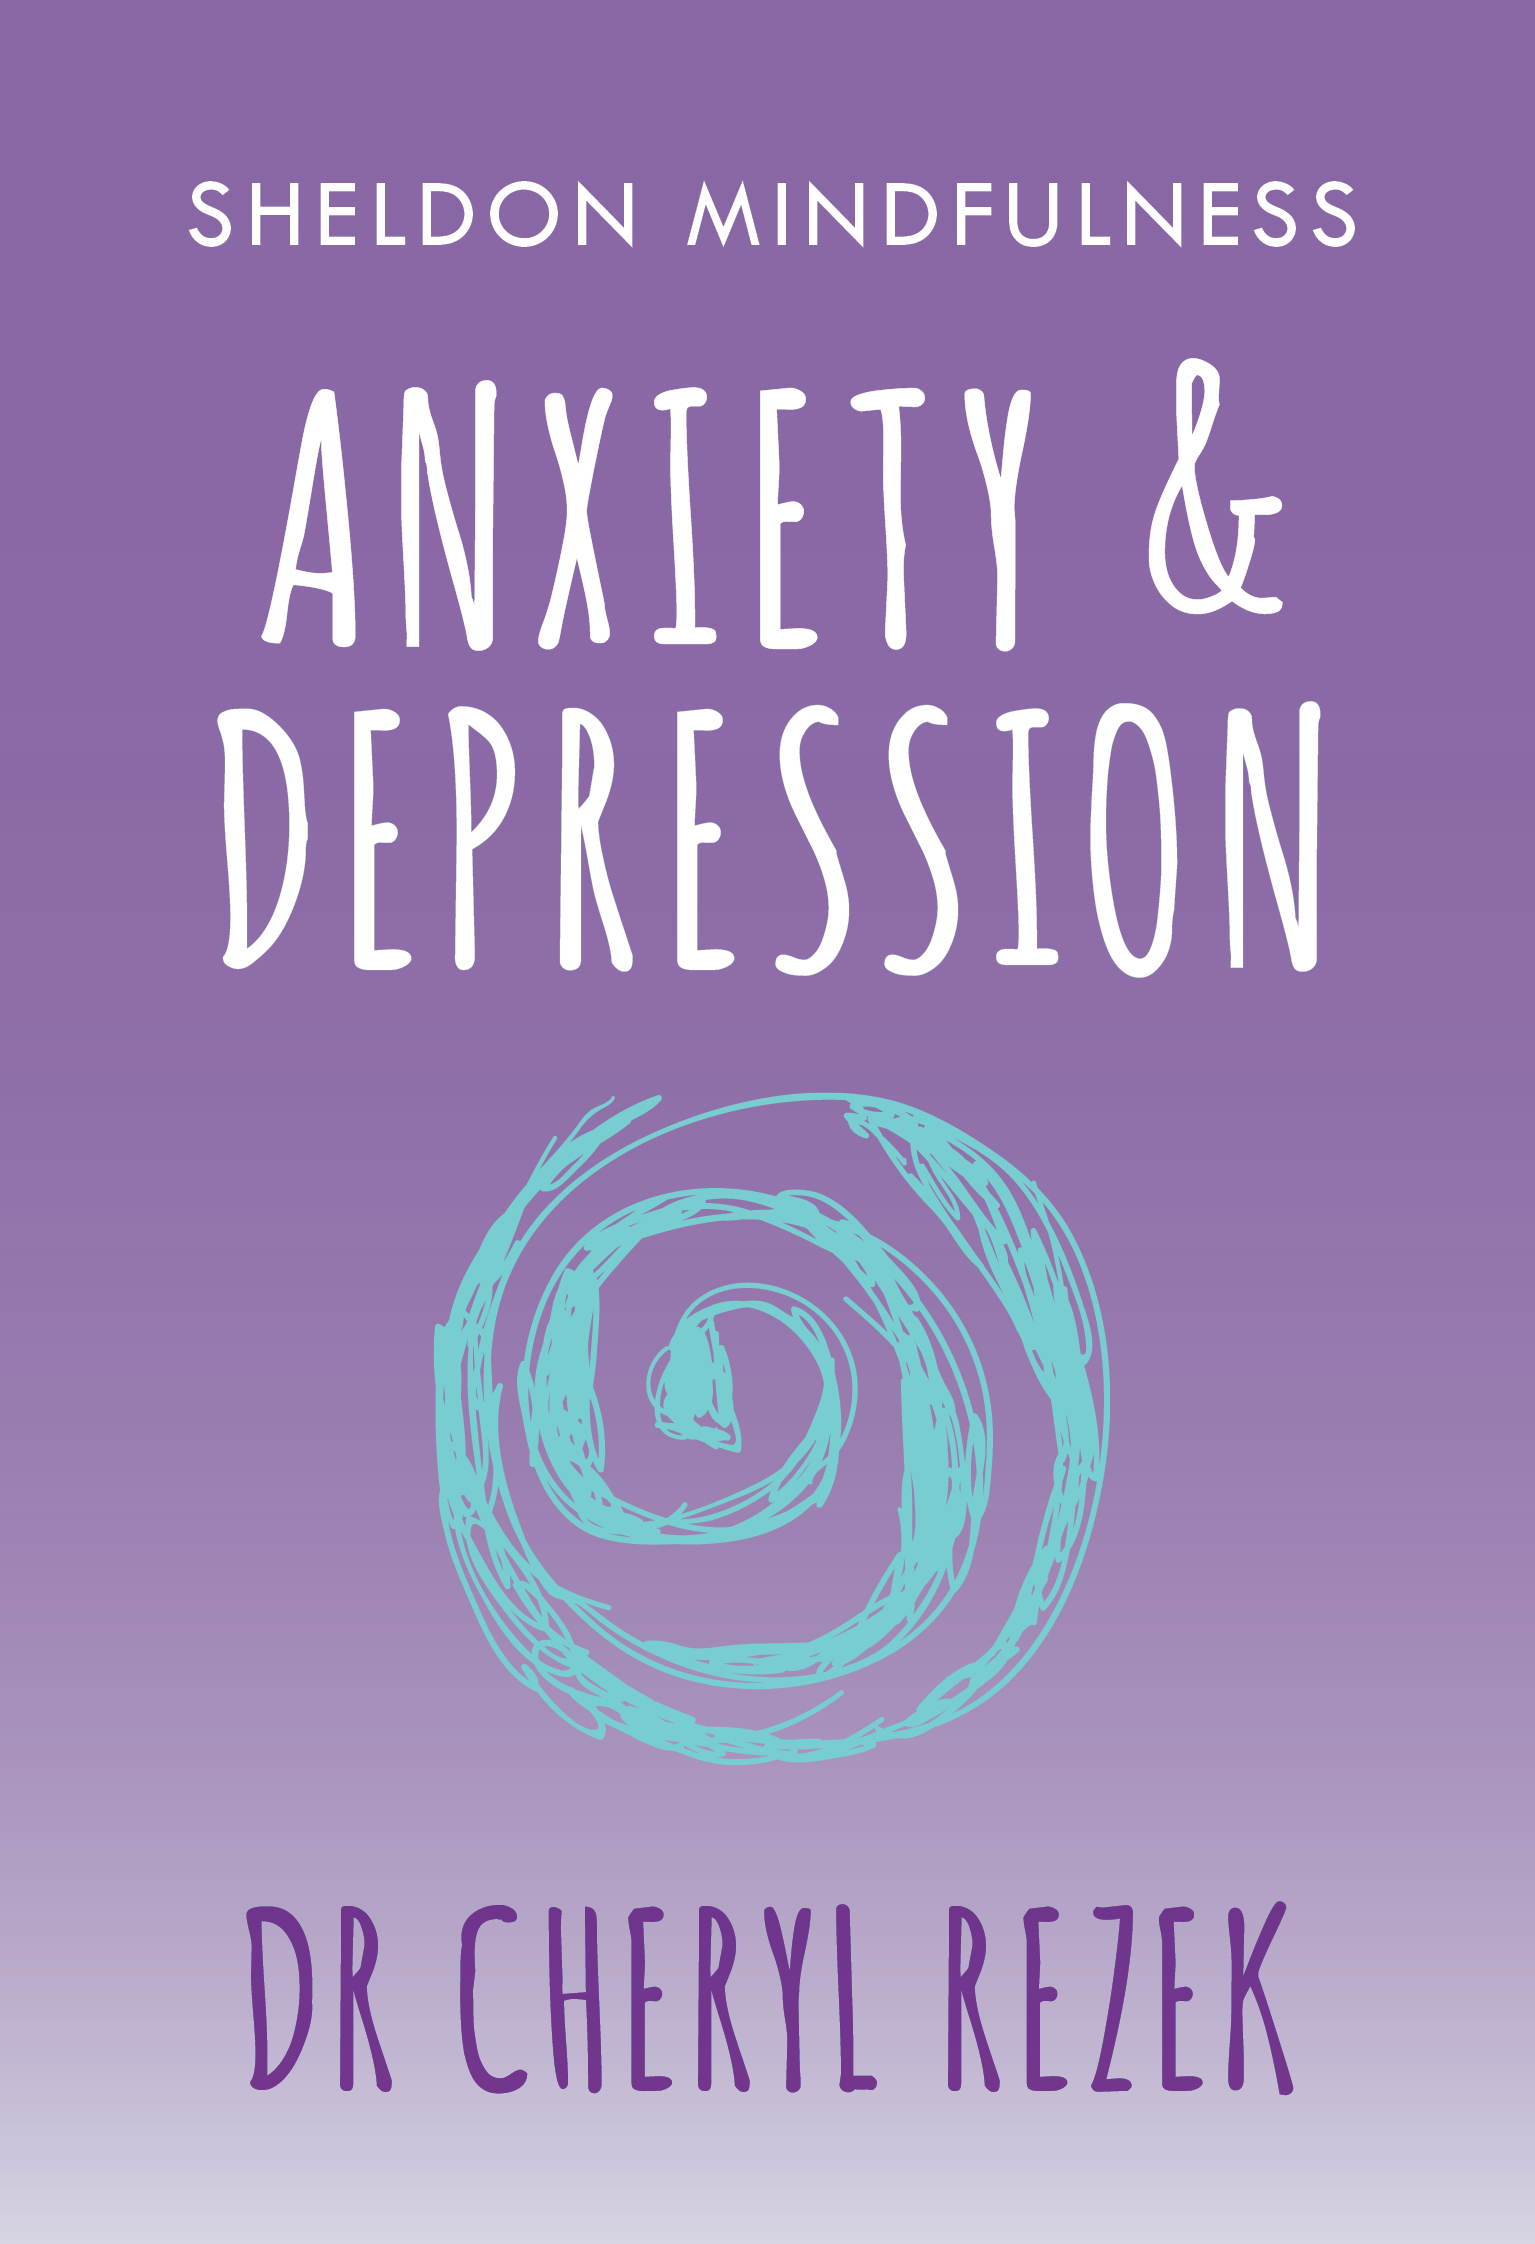 Recovery from depression and anxiety